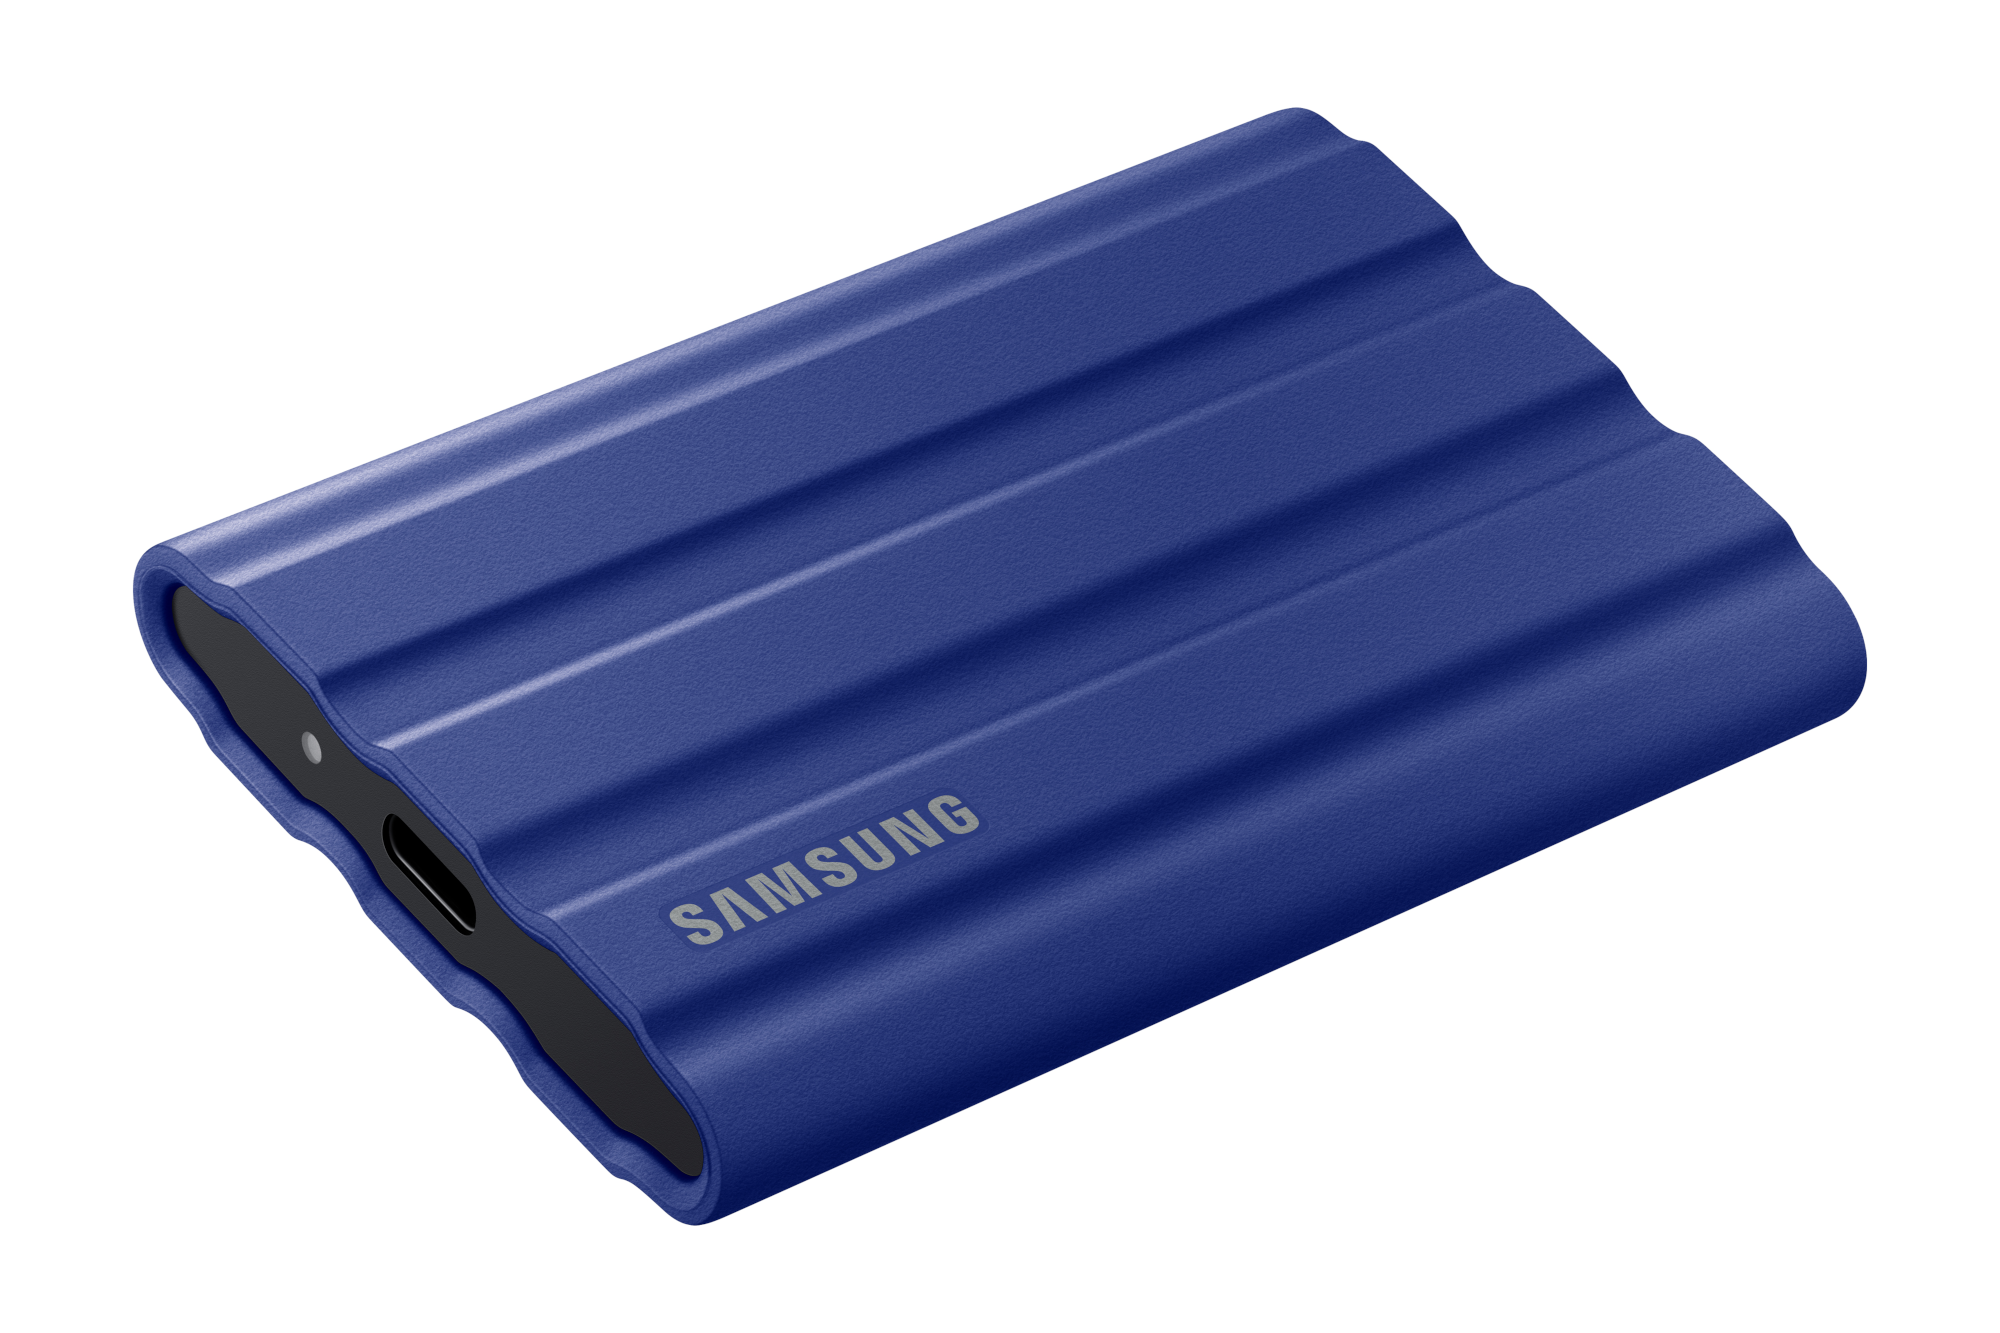 Samsung T7 Protect - Finest performance USB drive